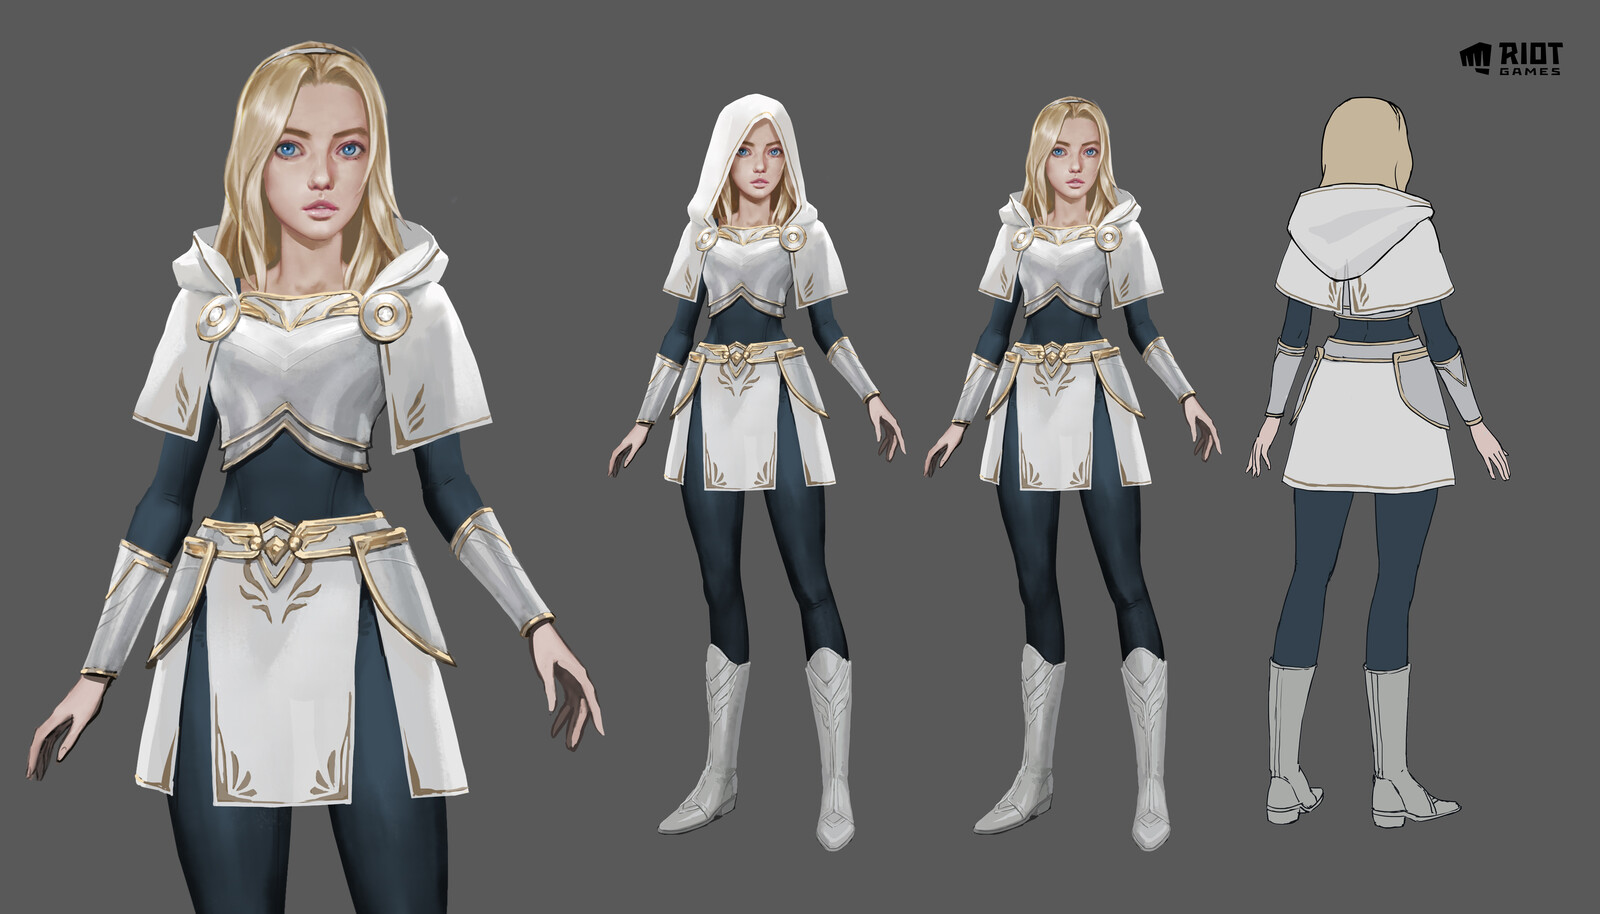 Here is the final concept we landed on for Lux's look.  We incorporated the hood and updated the armor and clothing a bit.